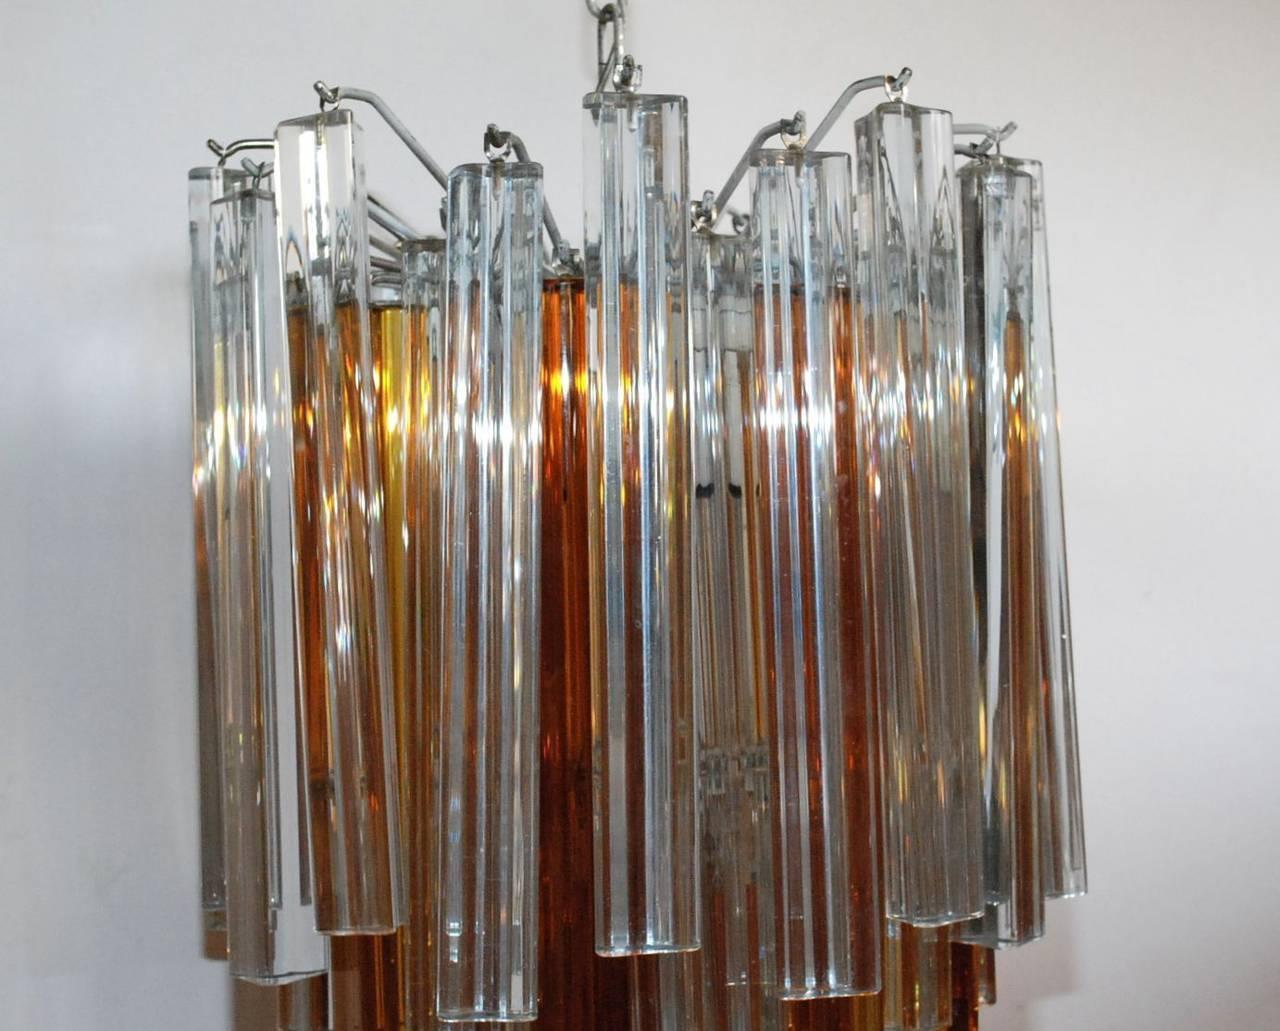 Vintage Italian chandelier with amber and clear Murano glass crystals hand cut into three points using Triedri technique, mounted on white painted metal frame / Designed by Venini circa 1960’s / Made in Italy 
3 lights / E26 or E27 type / max 60W